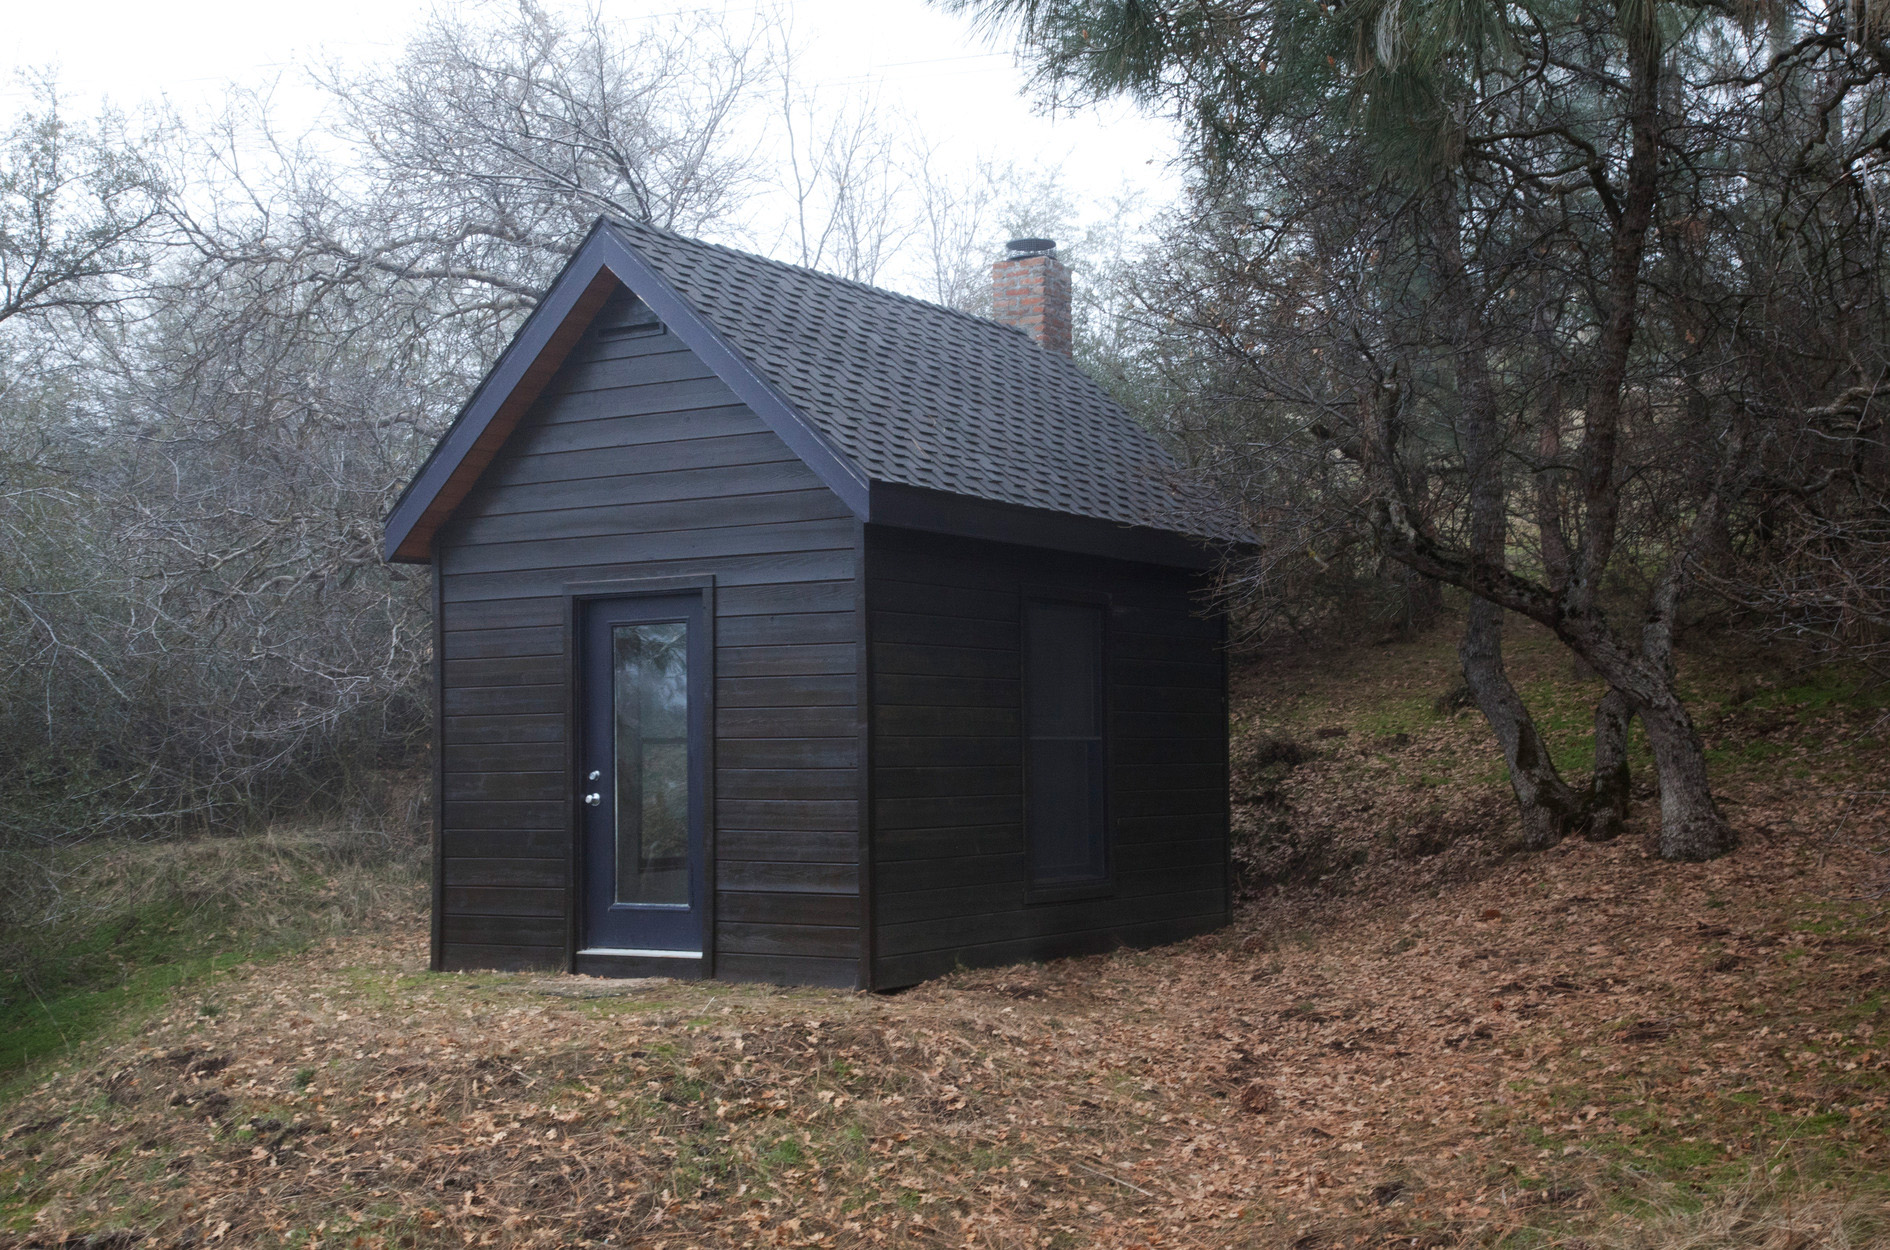 James Benning, <em>Henry David Thoreau Cabin</em> (exterior), 2007-08. 14' 4 in x 10' 4 in x 14'. All images courtesy of the artist unless otherwise noted.